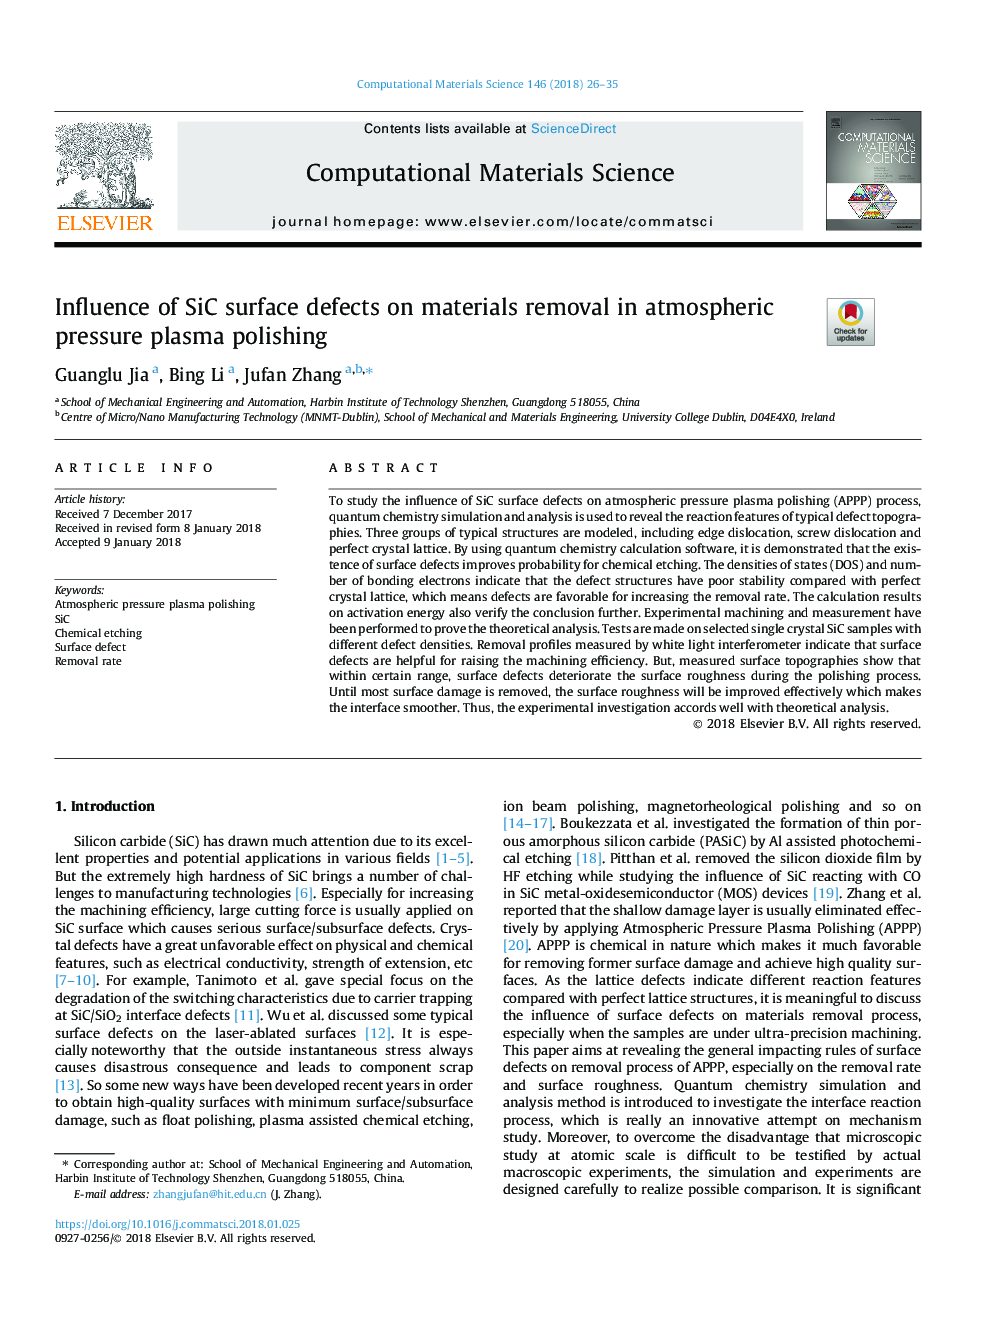 Influence of SiC surface defects on materials removal in atmospheric pressure plasma polishing